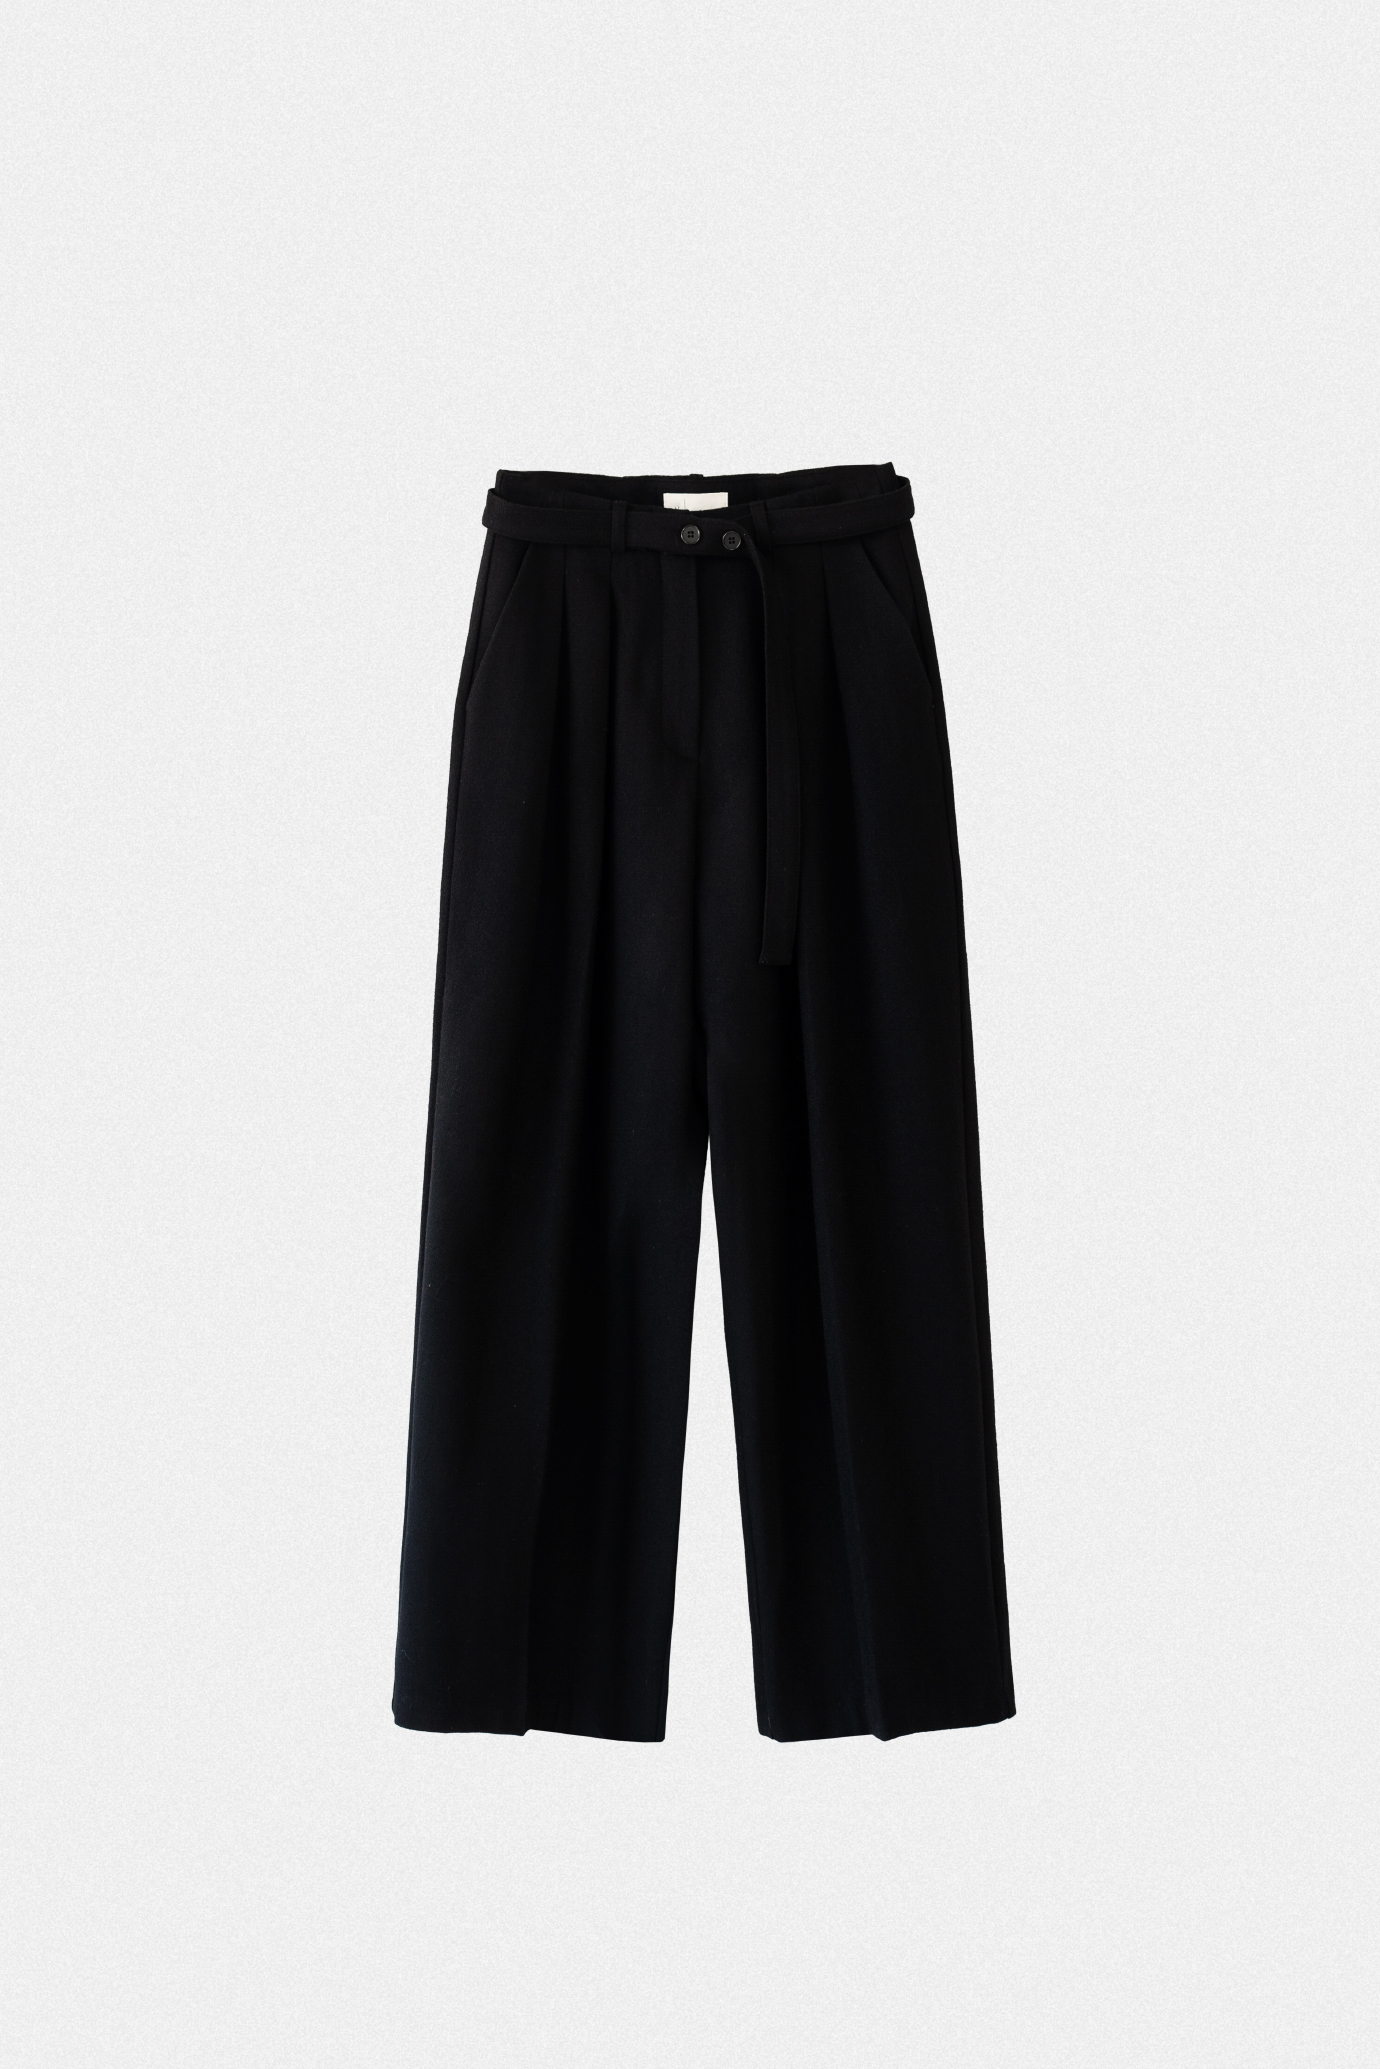 19363_Belted Wool Trousers